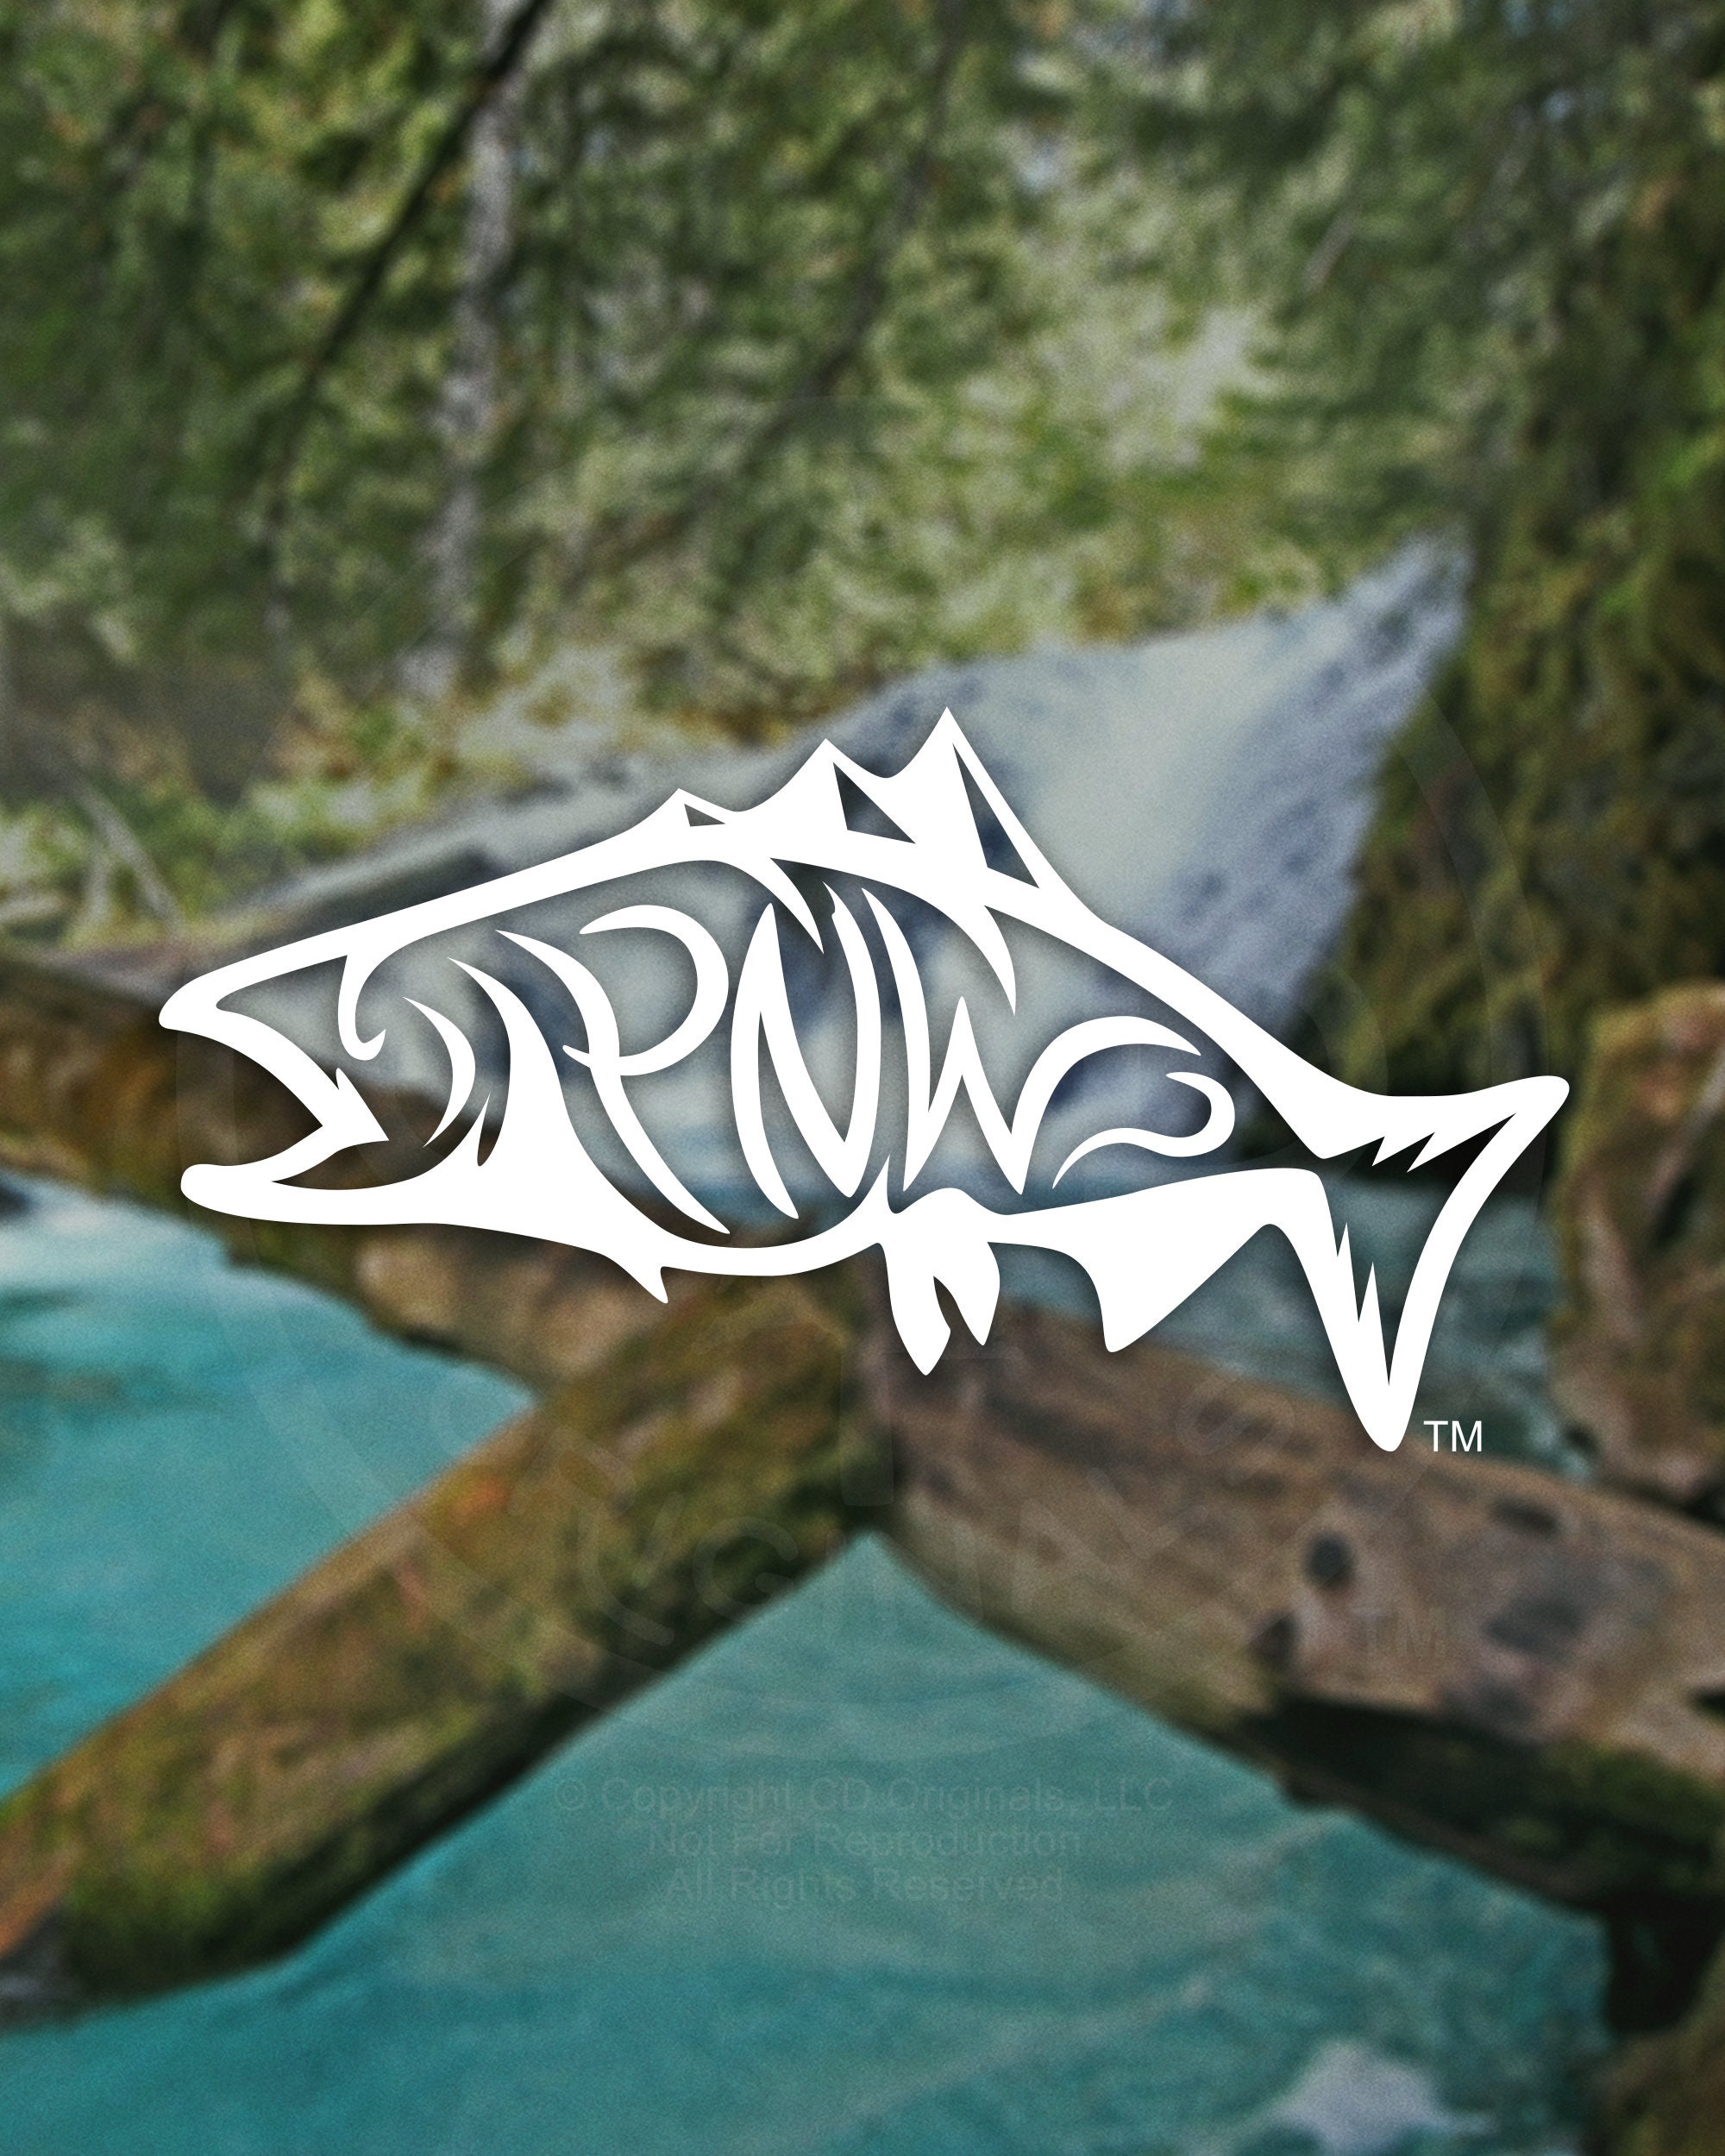 Patagonia Flying Fish Sticker - Accessories - Chicago Fly Fishing